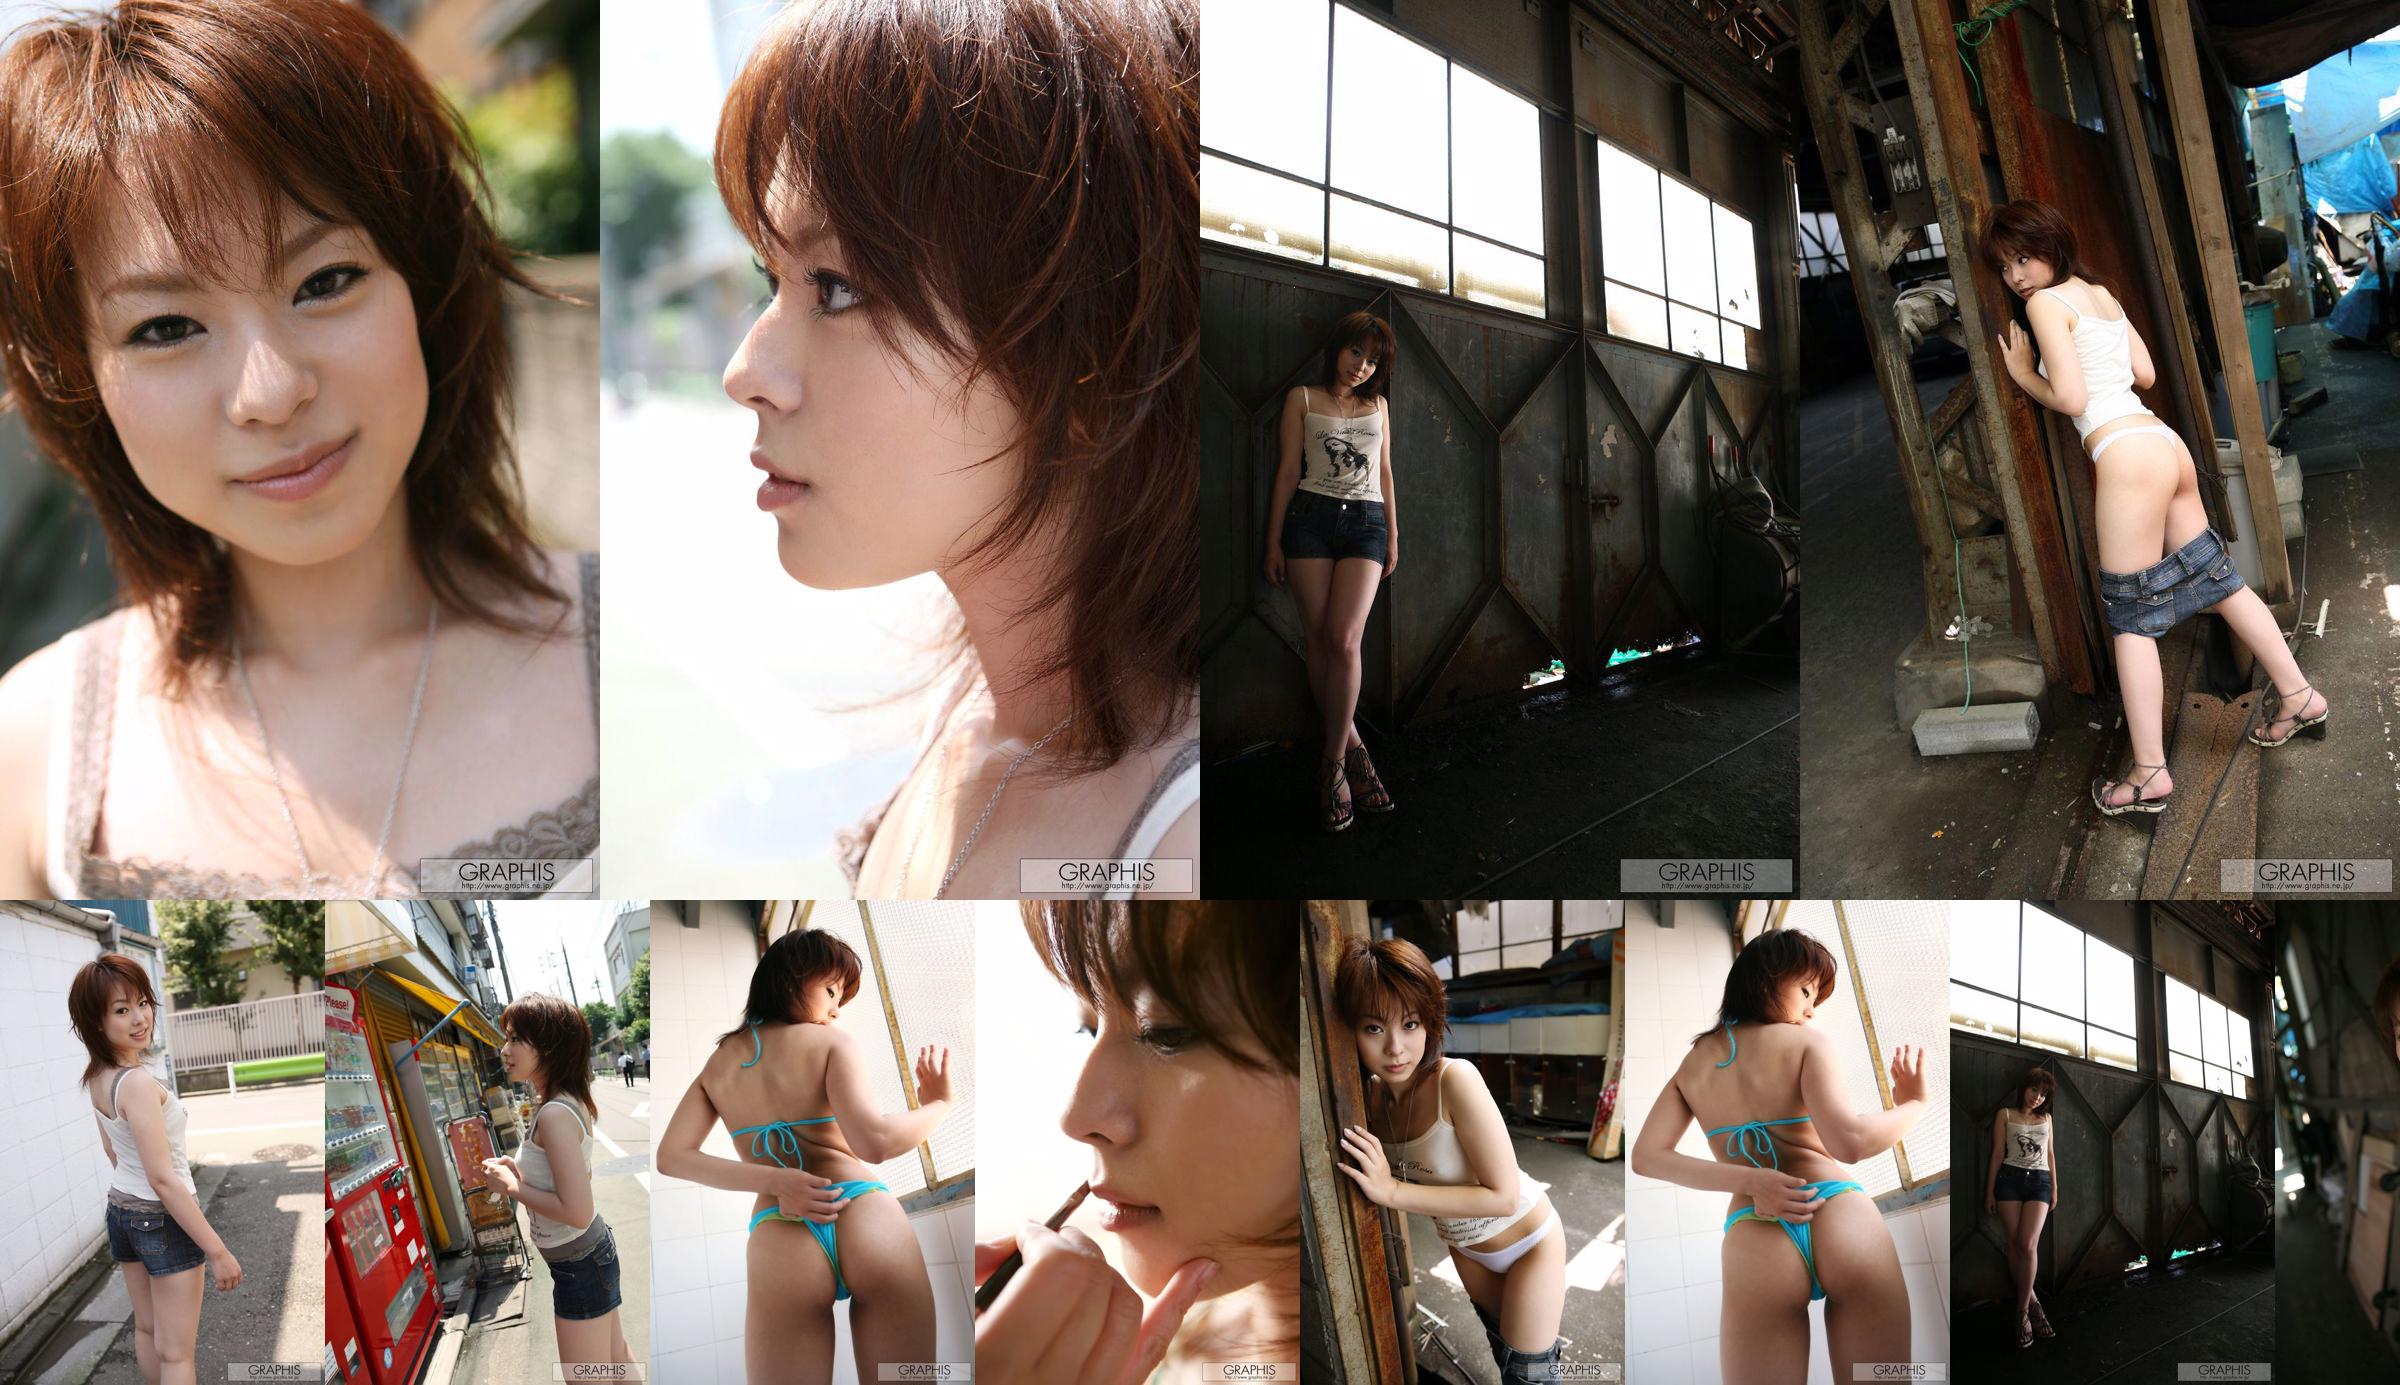 Mina Manabe Mina Manabe [Graphis] First Gravure First Take Off Daughter No.af93c2 Pagina 4